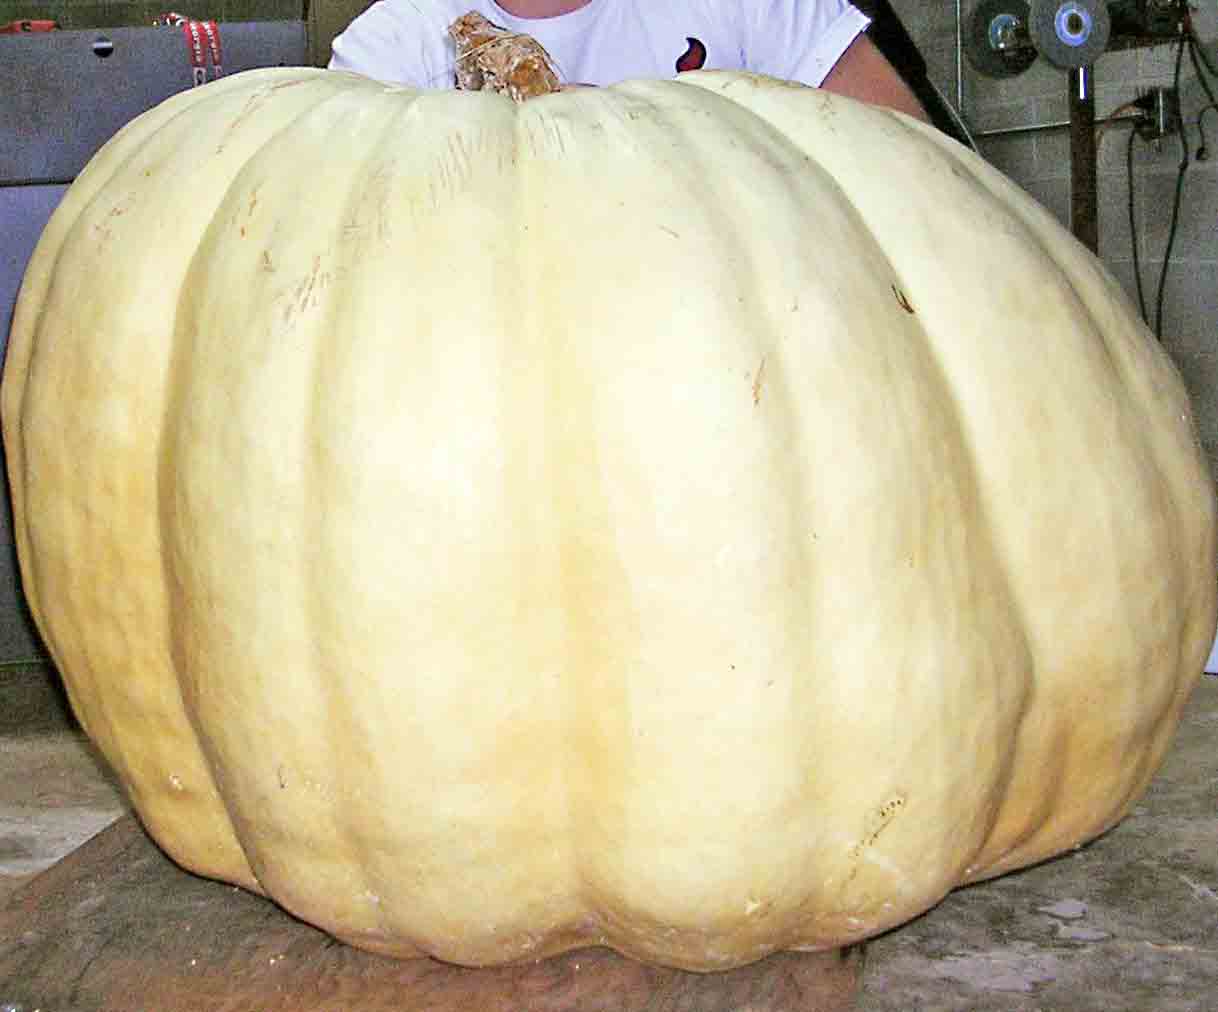 Trey Thomas, of White County took home first place in the 2012 Georgia 4-H Pumpkin Growing Contest with his 342-pound pumpkin.